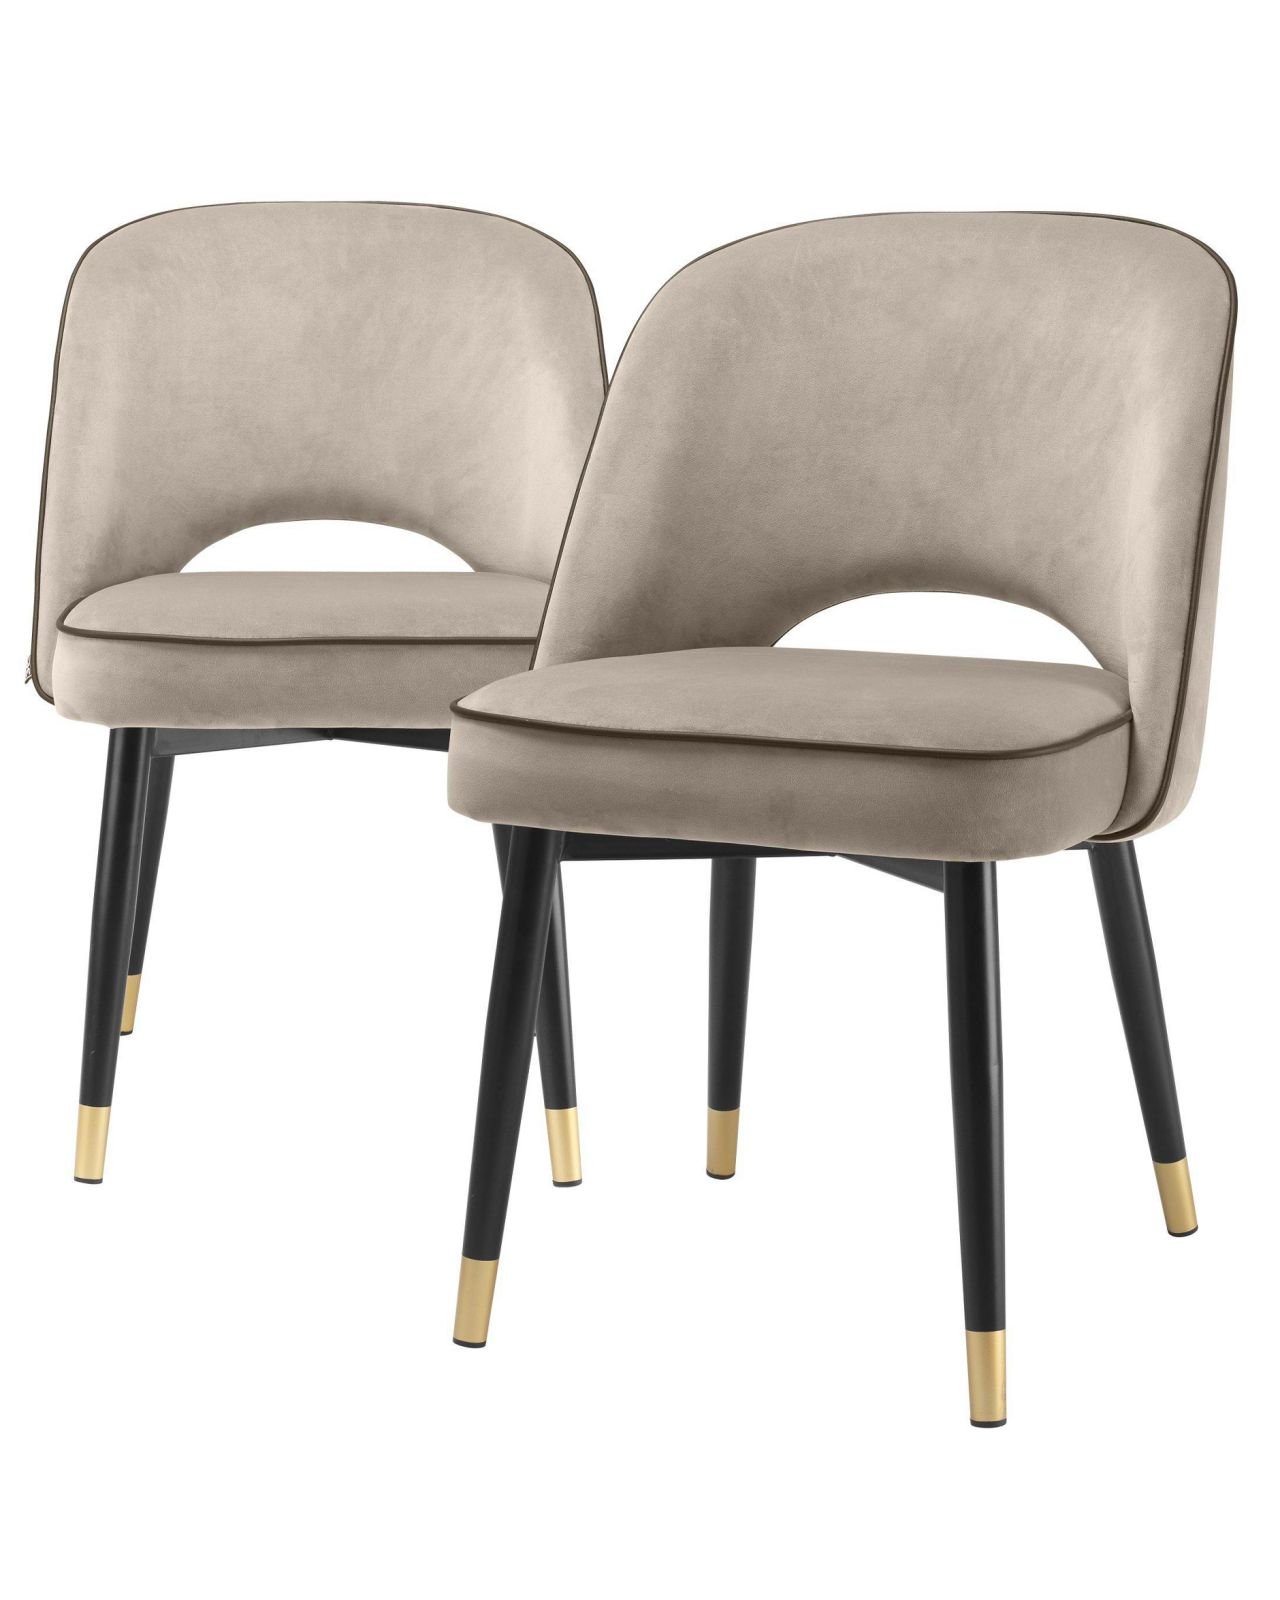 Cliff dining chairs savona greige